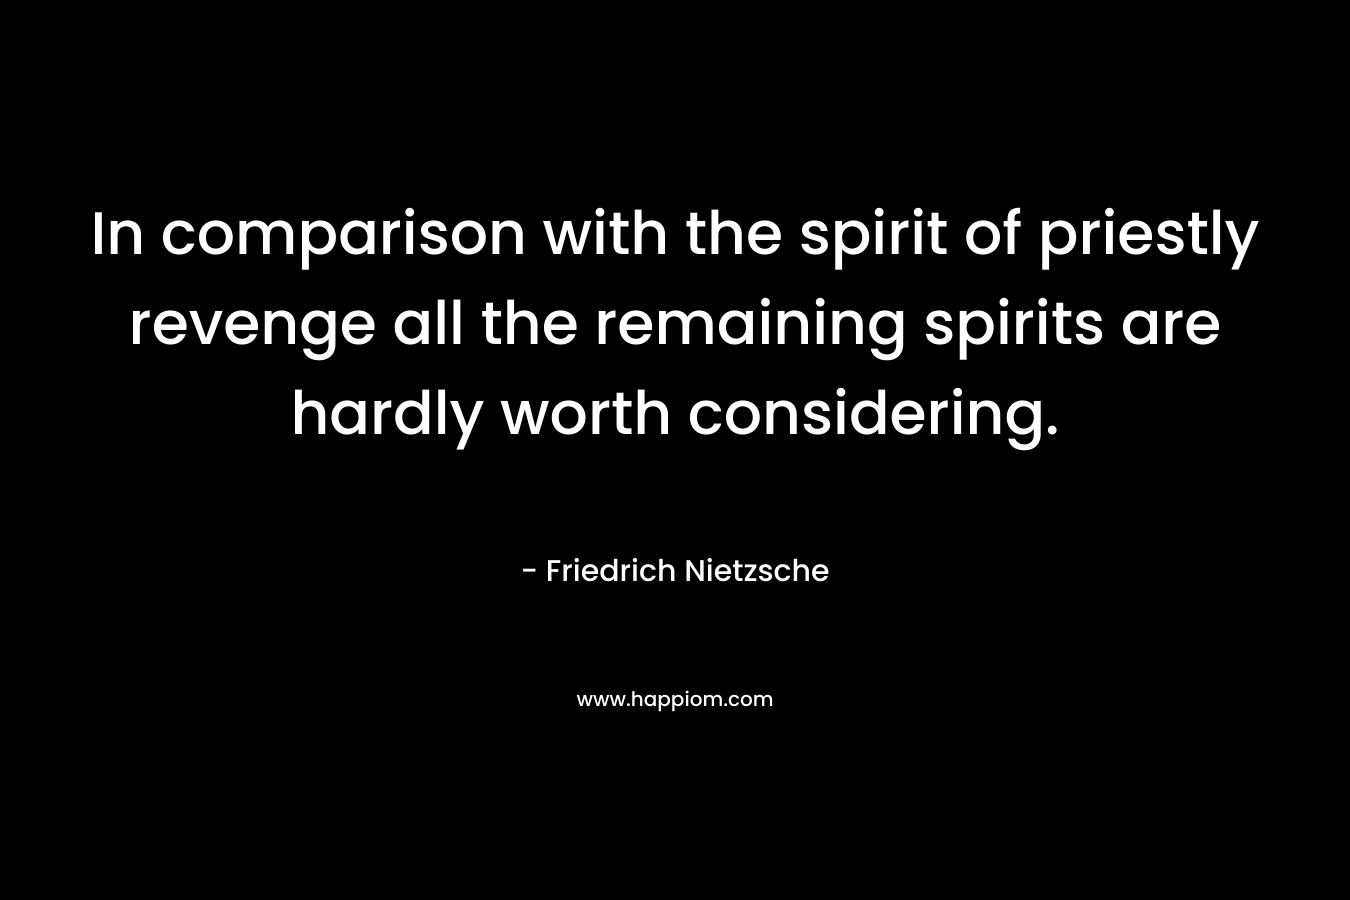 In comparison with the spirit of priestly revenge all the remaining spirits are hardly worth considering. – Friedrich Nietzsche